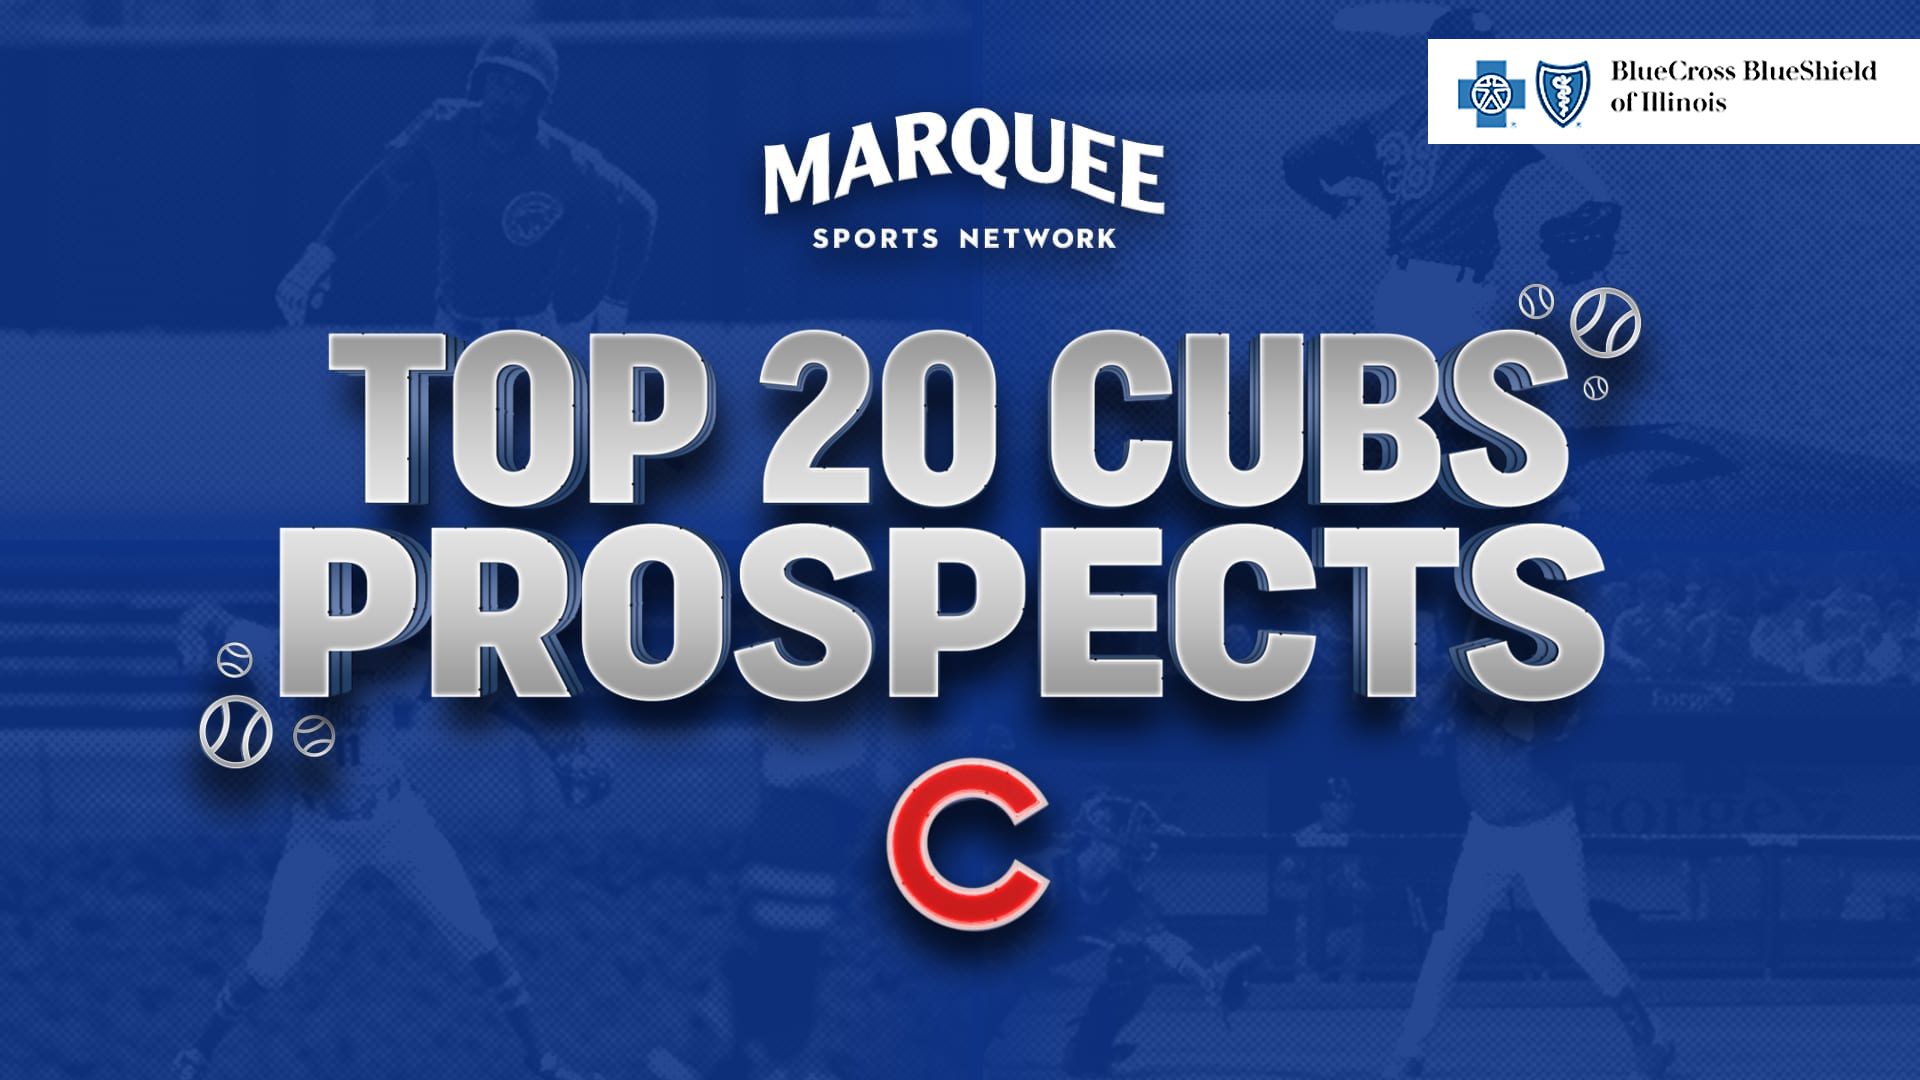 Top 20 Cubs Prospects Bcbsil 2021